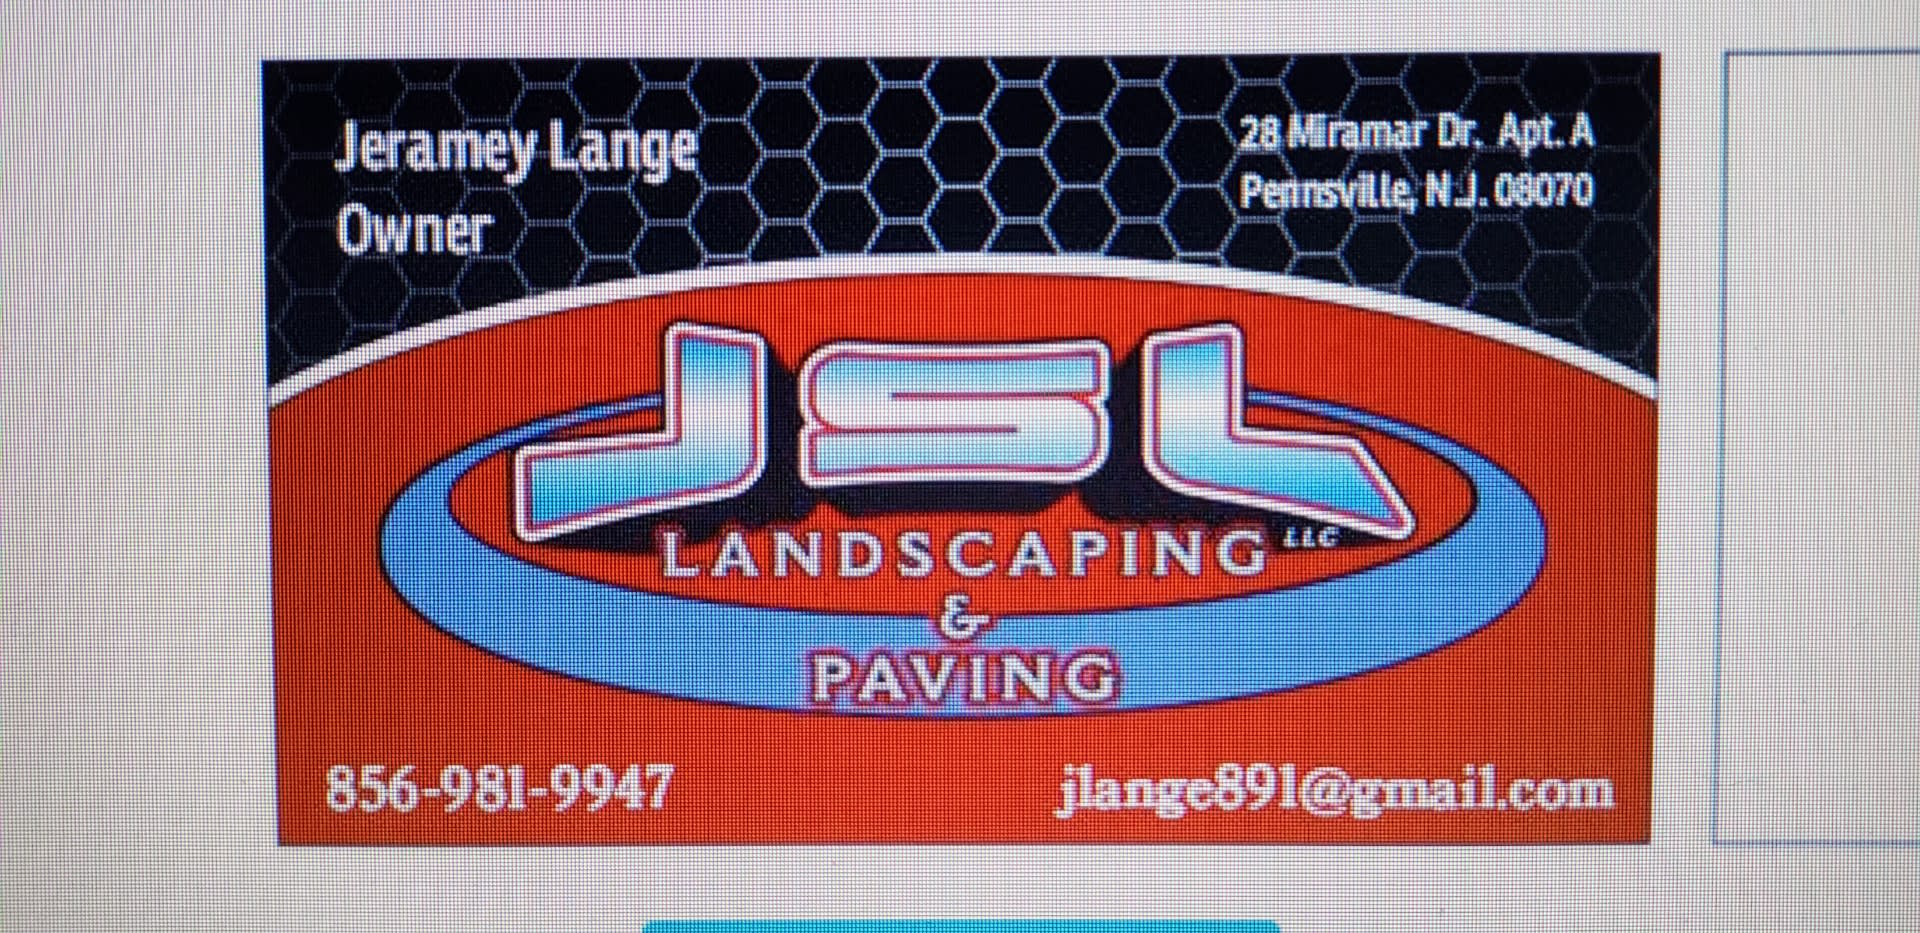 JSL Landscaping and Paving